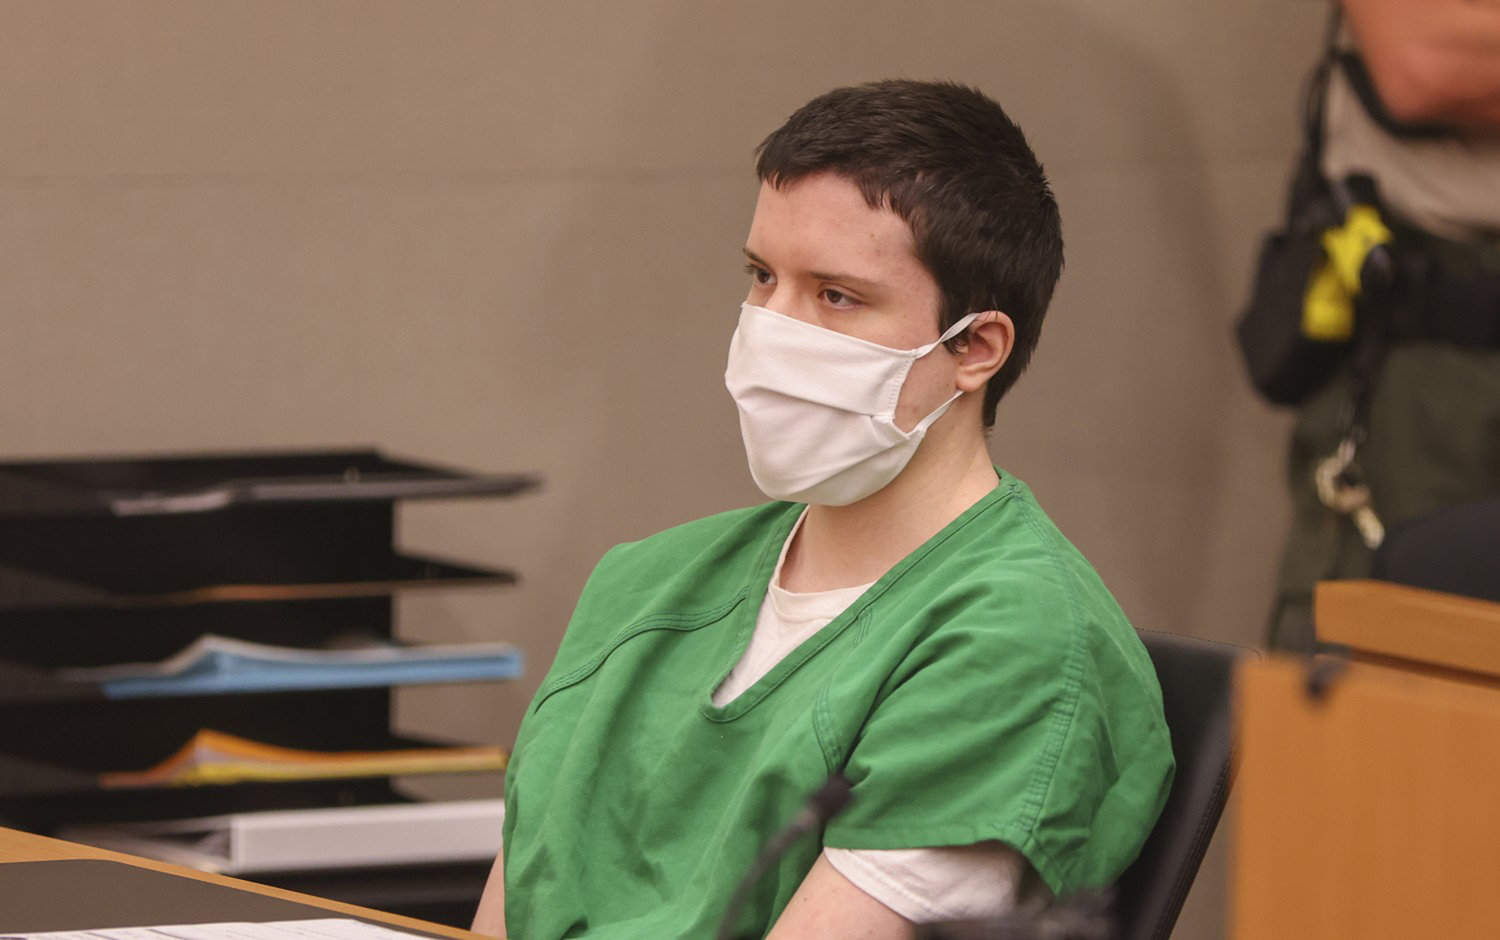 John T. Earnest, who killed one person and injured three in a 2019 synagogue shooting in Poway, California, appears in court in San Diego on July 20, 2021. He was sentenced on Tuesday in federal court to life in prison, plus 30 years. (Eduardo Contreras/San Diego Union-Tribune/TNS)